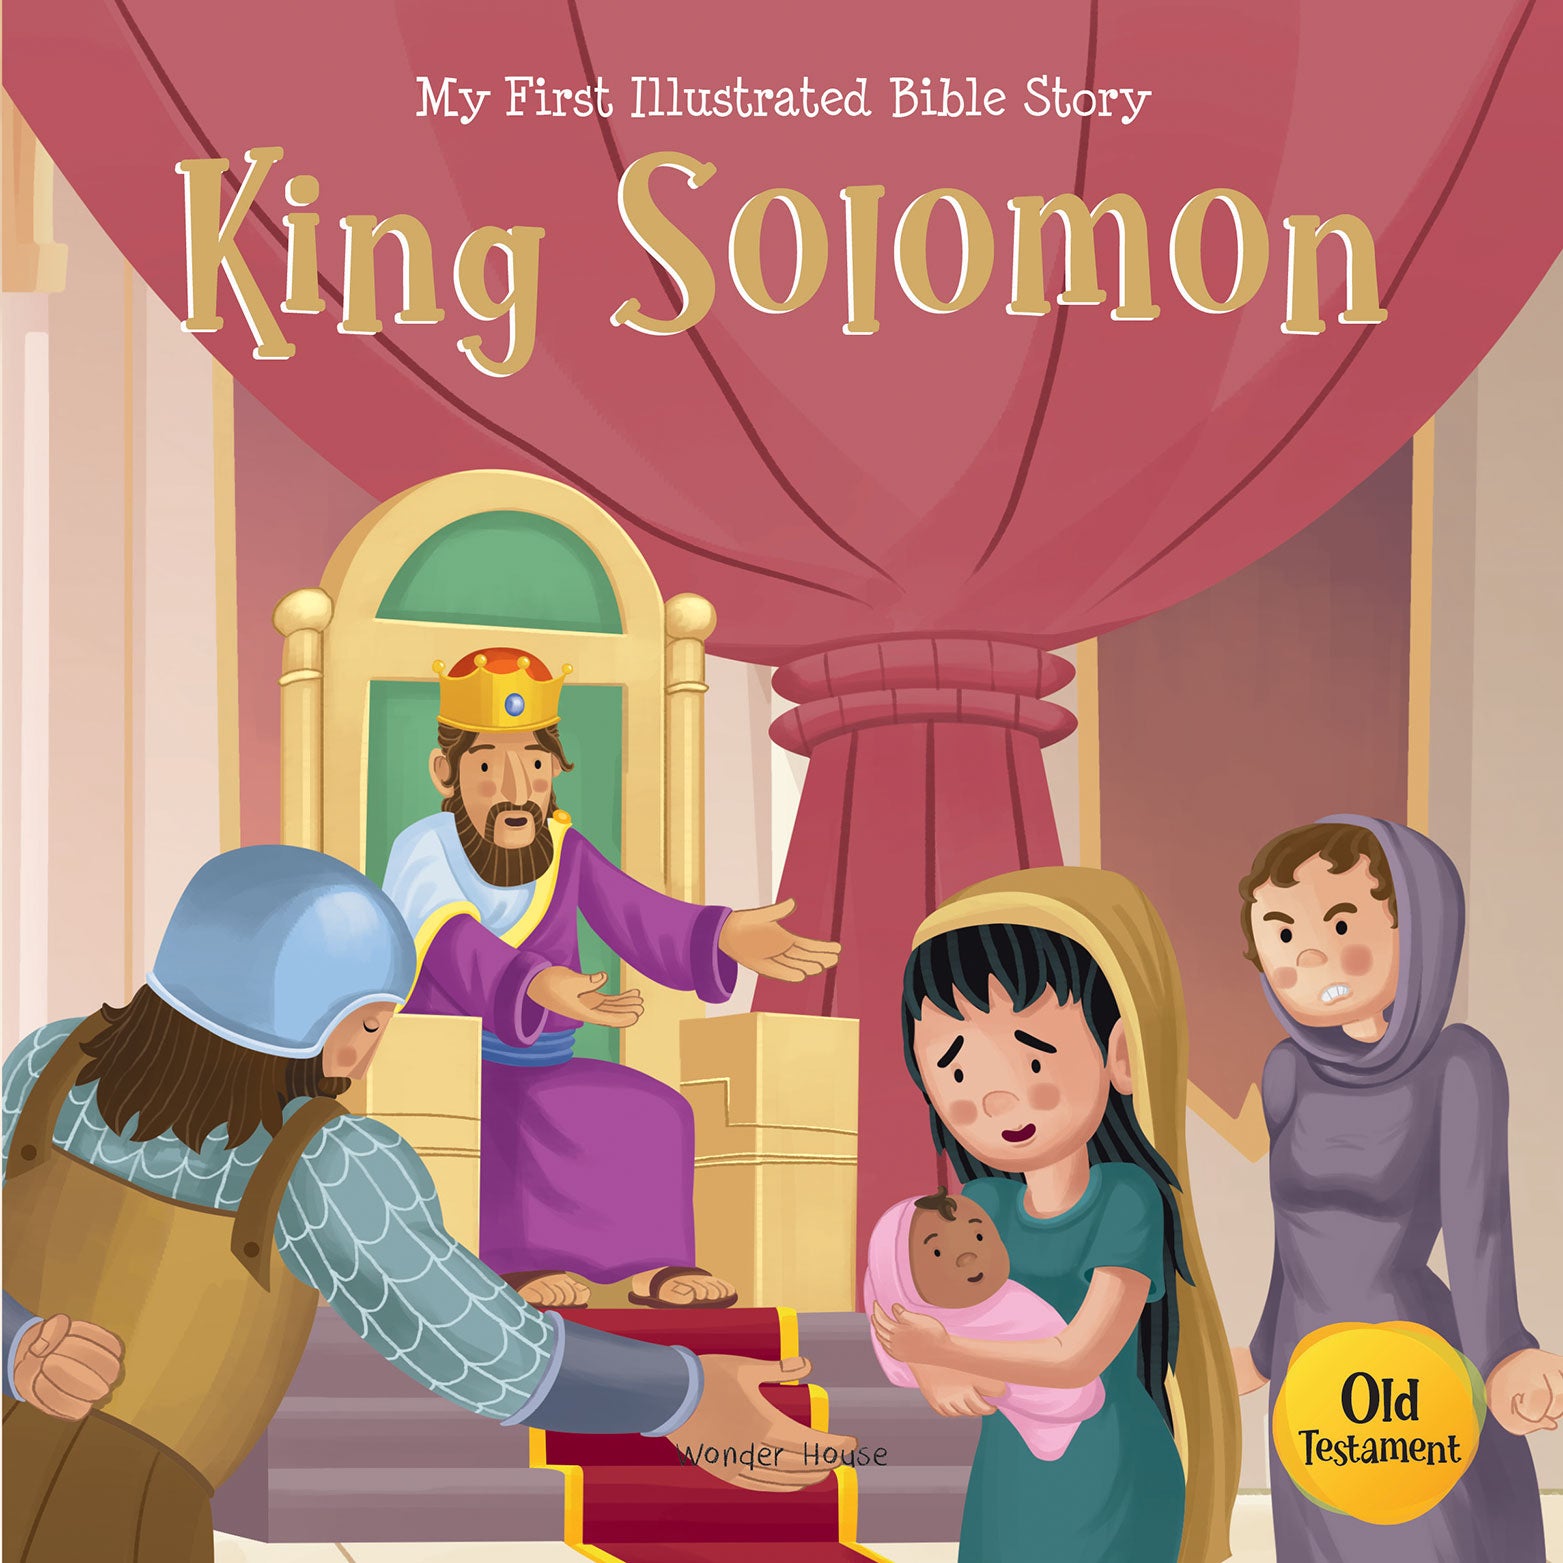 My First Illustrated Bible Story: King Solomon